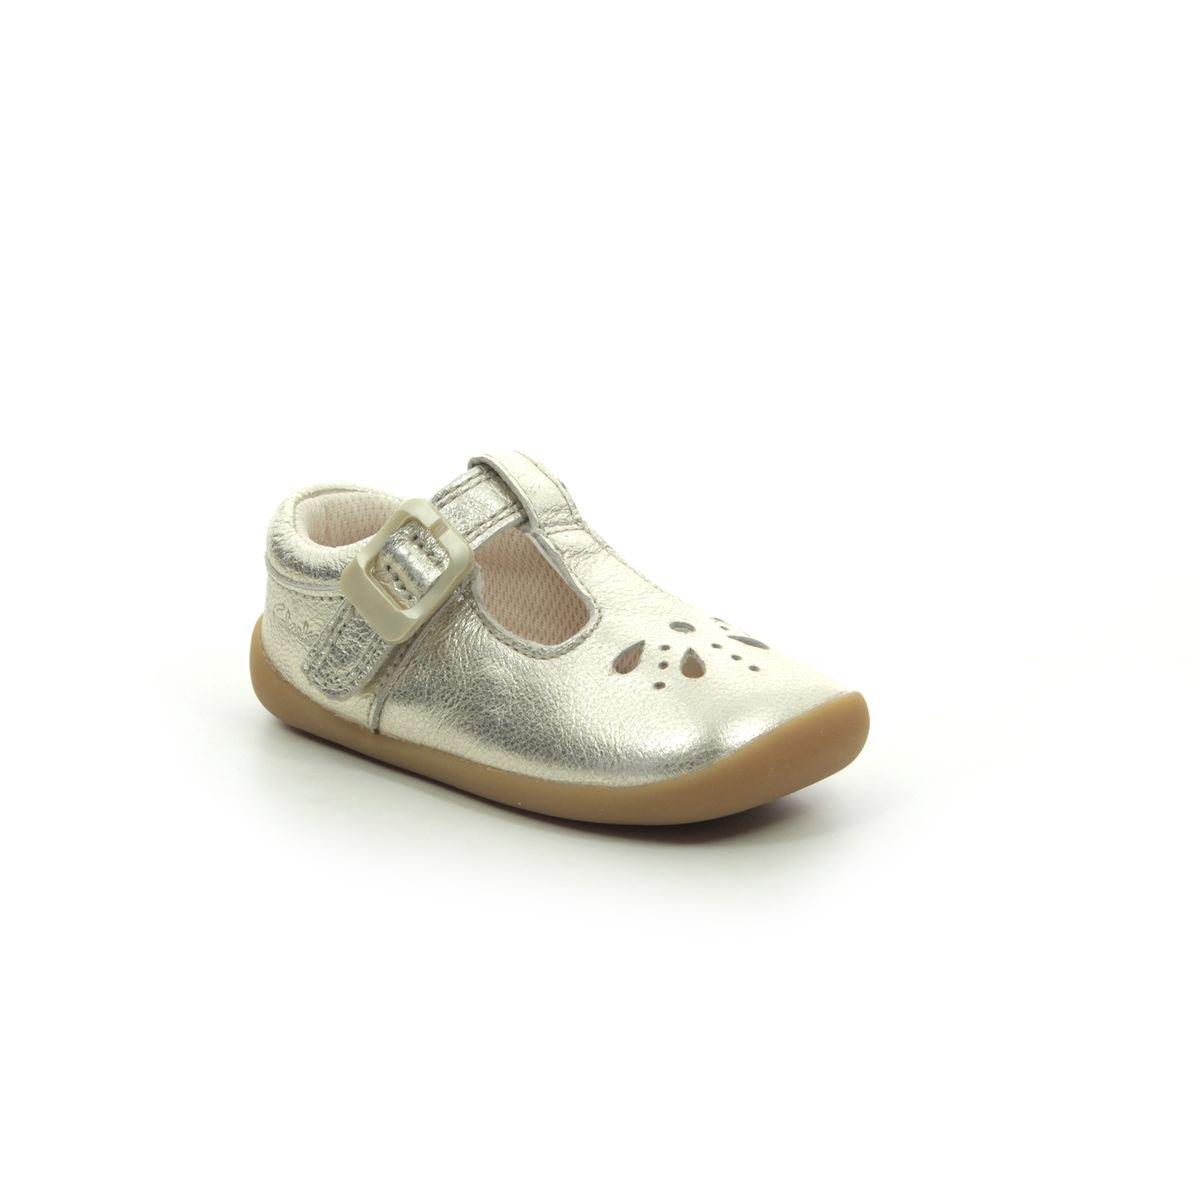 Details about   Clarks Girls Roamer Star Patent Leather T-Bar First Shoe Cruisers 